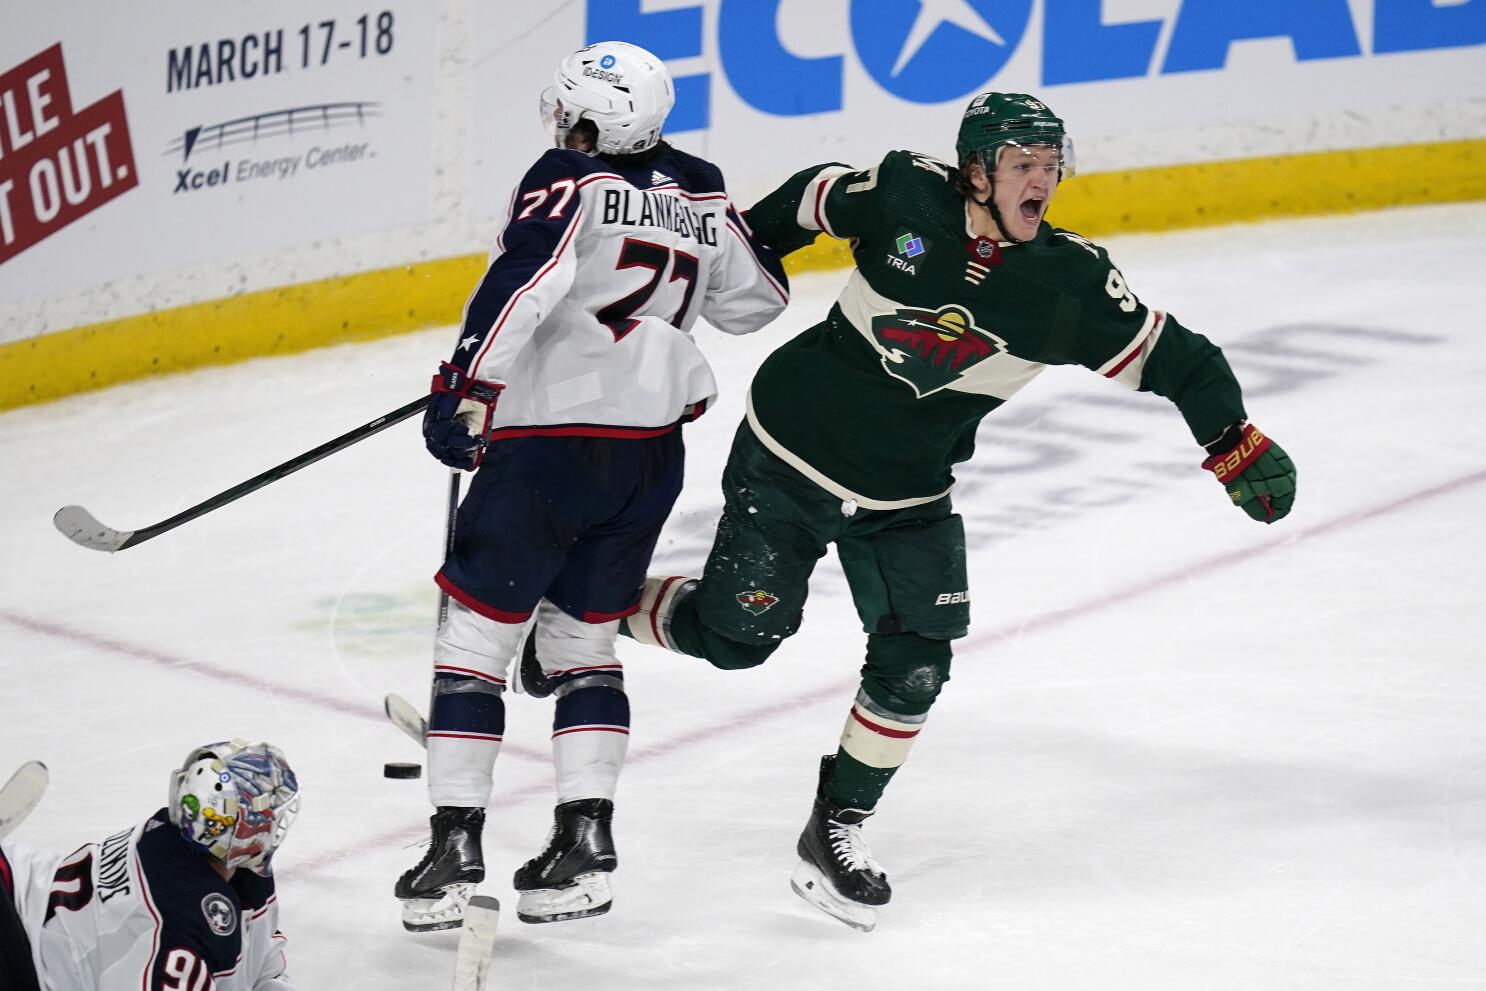 Kaprizov pulls off Wild jersey to reveal Ovechkin one at NHL showcase -  Bring Me The News